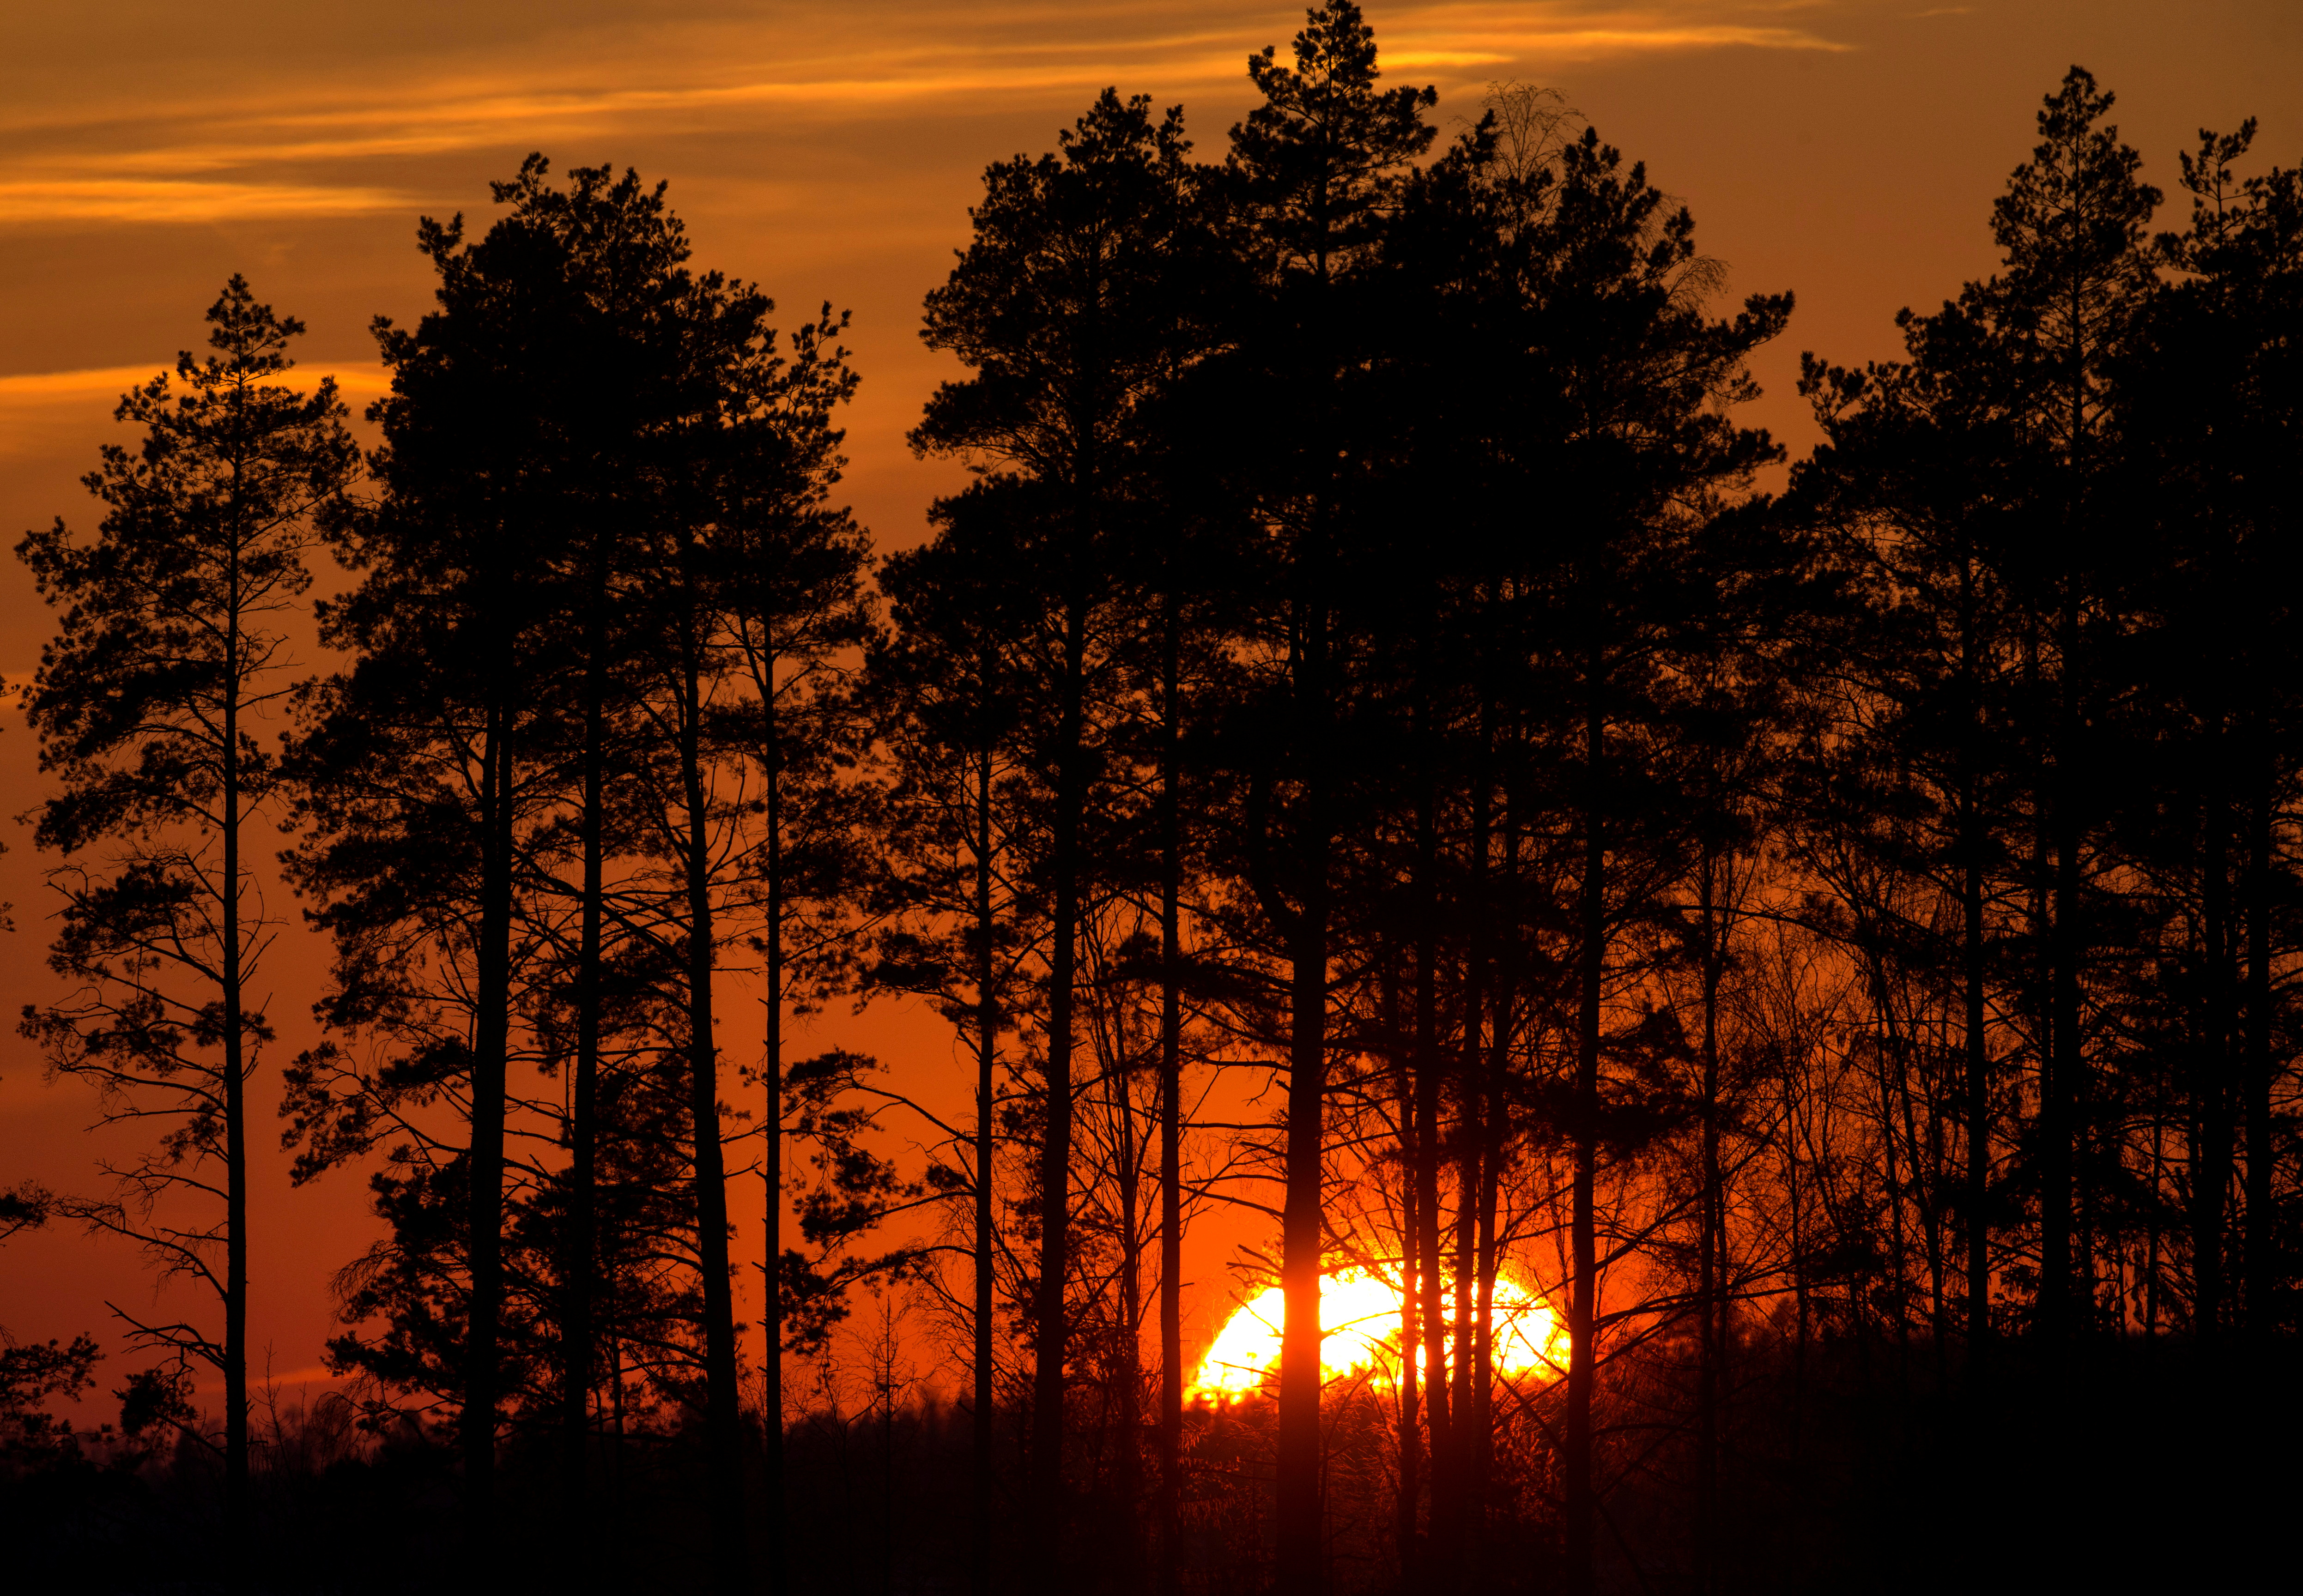 Trees silhouetted during sunset near the town of Berezino